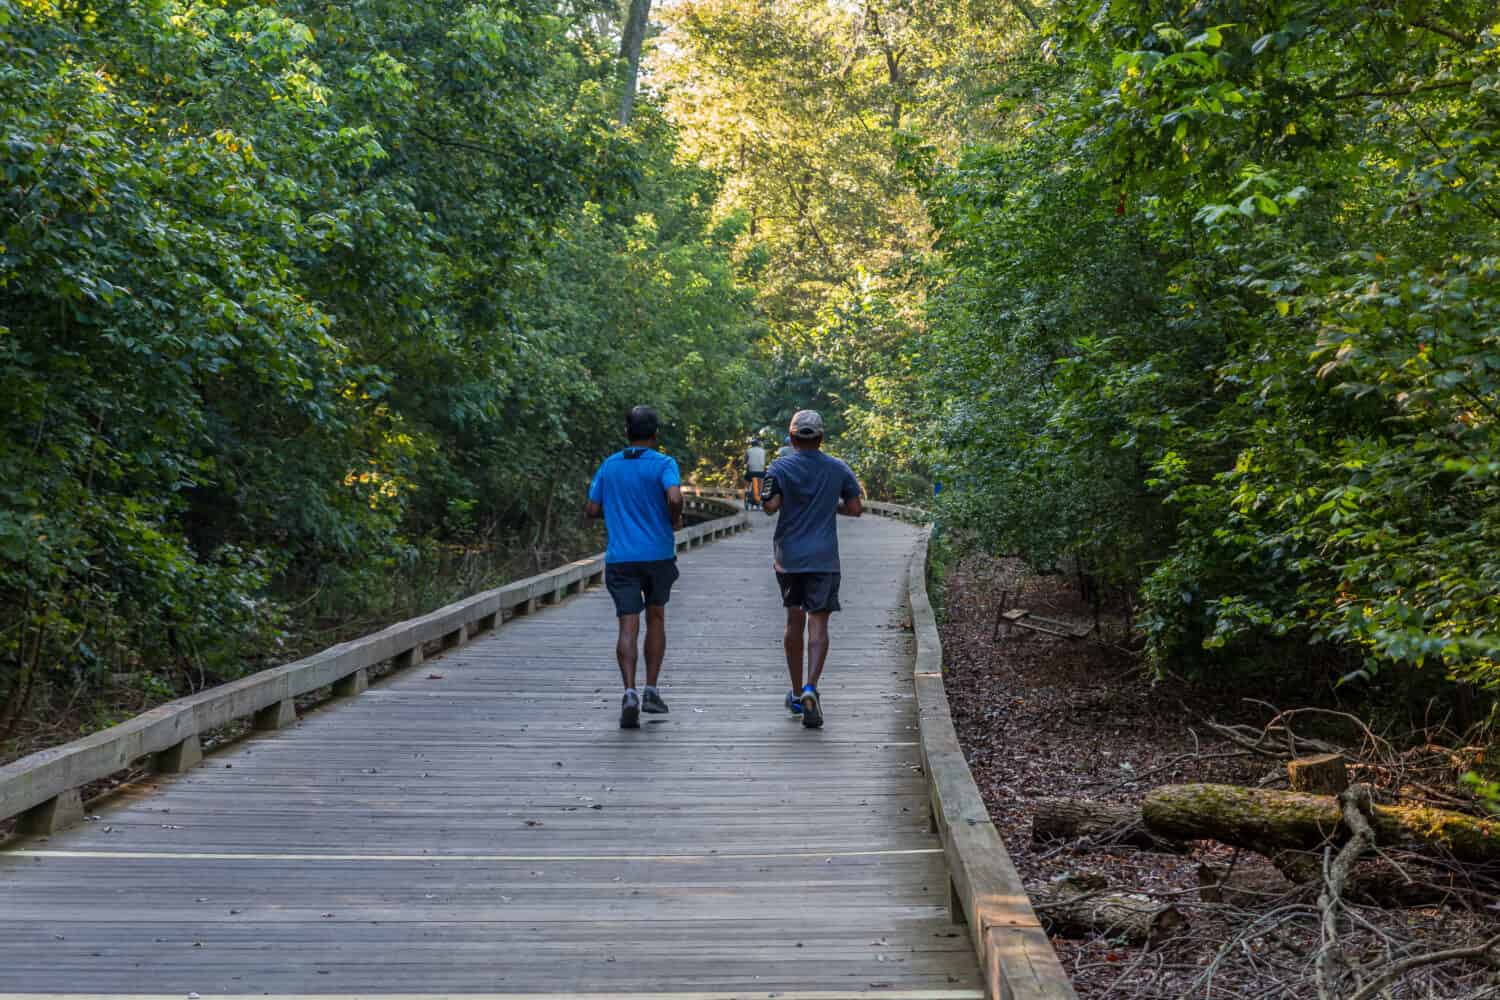 ALPHARETTA, GEORGIA -August 27, 2017: The Big Creek Greenway is over 20 miles of paved and board fitness trails spanning two counties north of Atlanta through lush green wetlands.